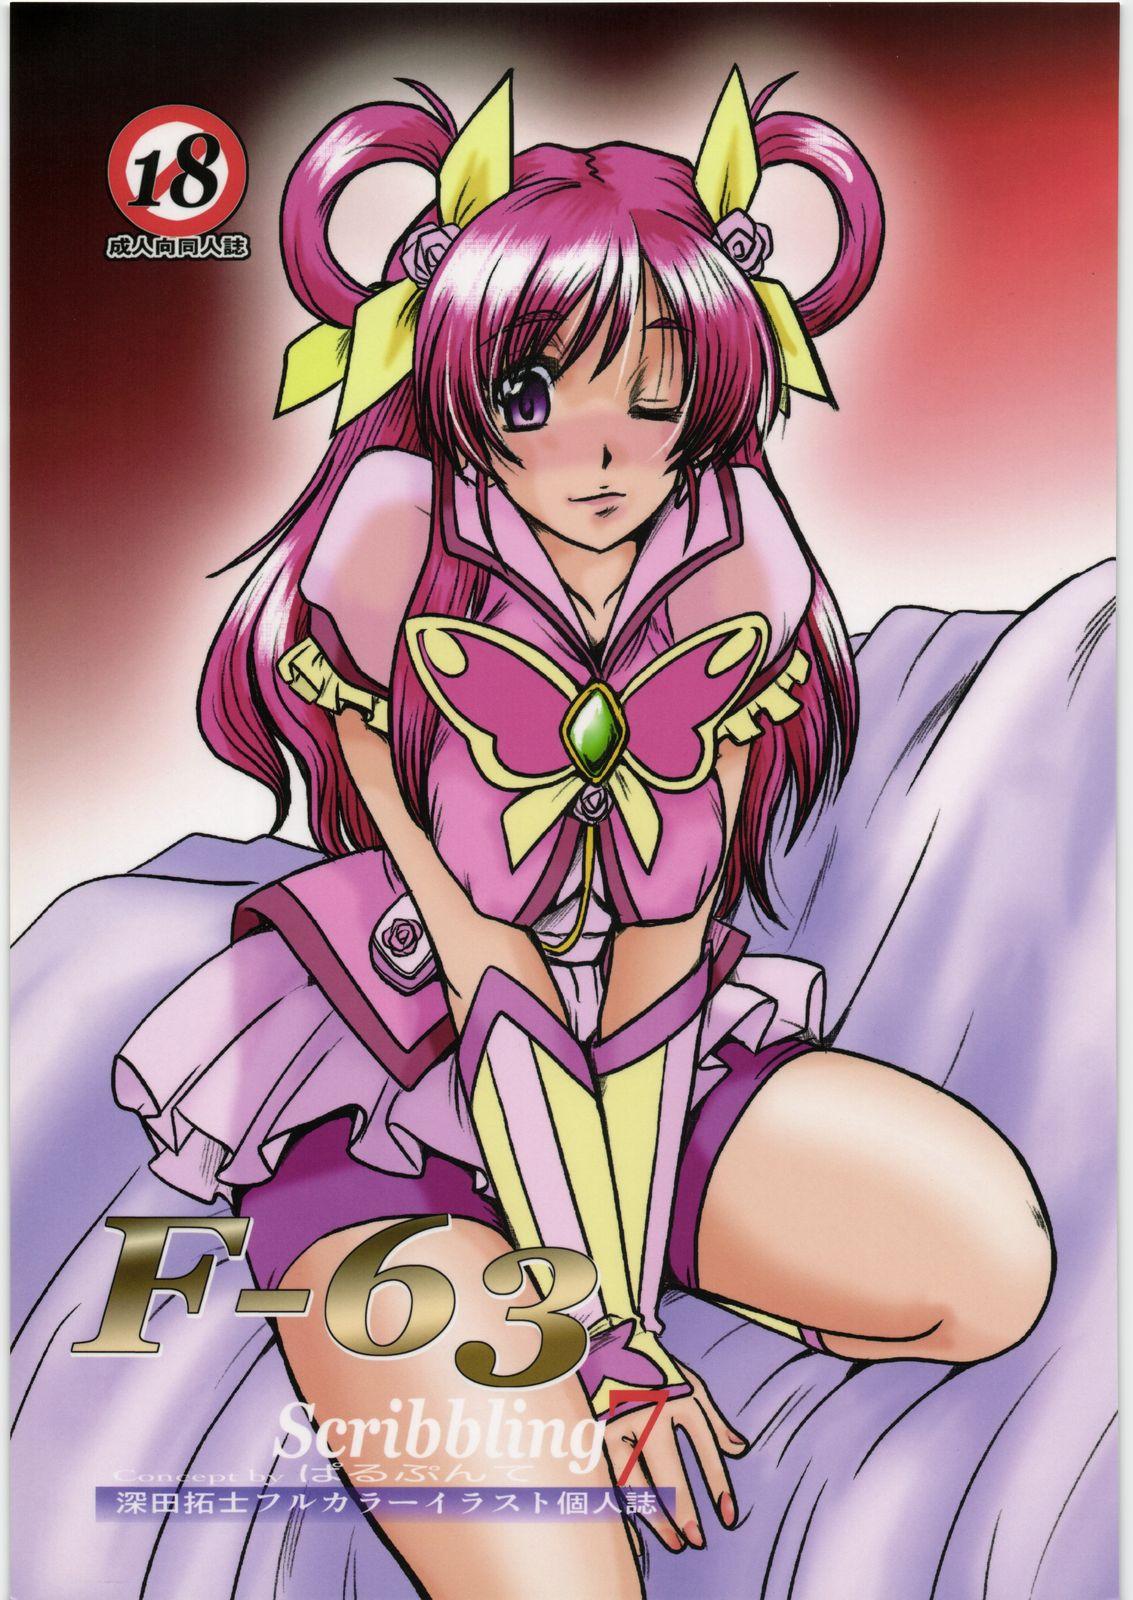 Gay Latino F-63 Scribbling 7 - Yes precure 5 Real Orgasms - Picture 1